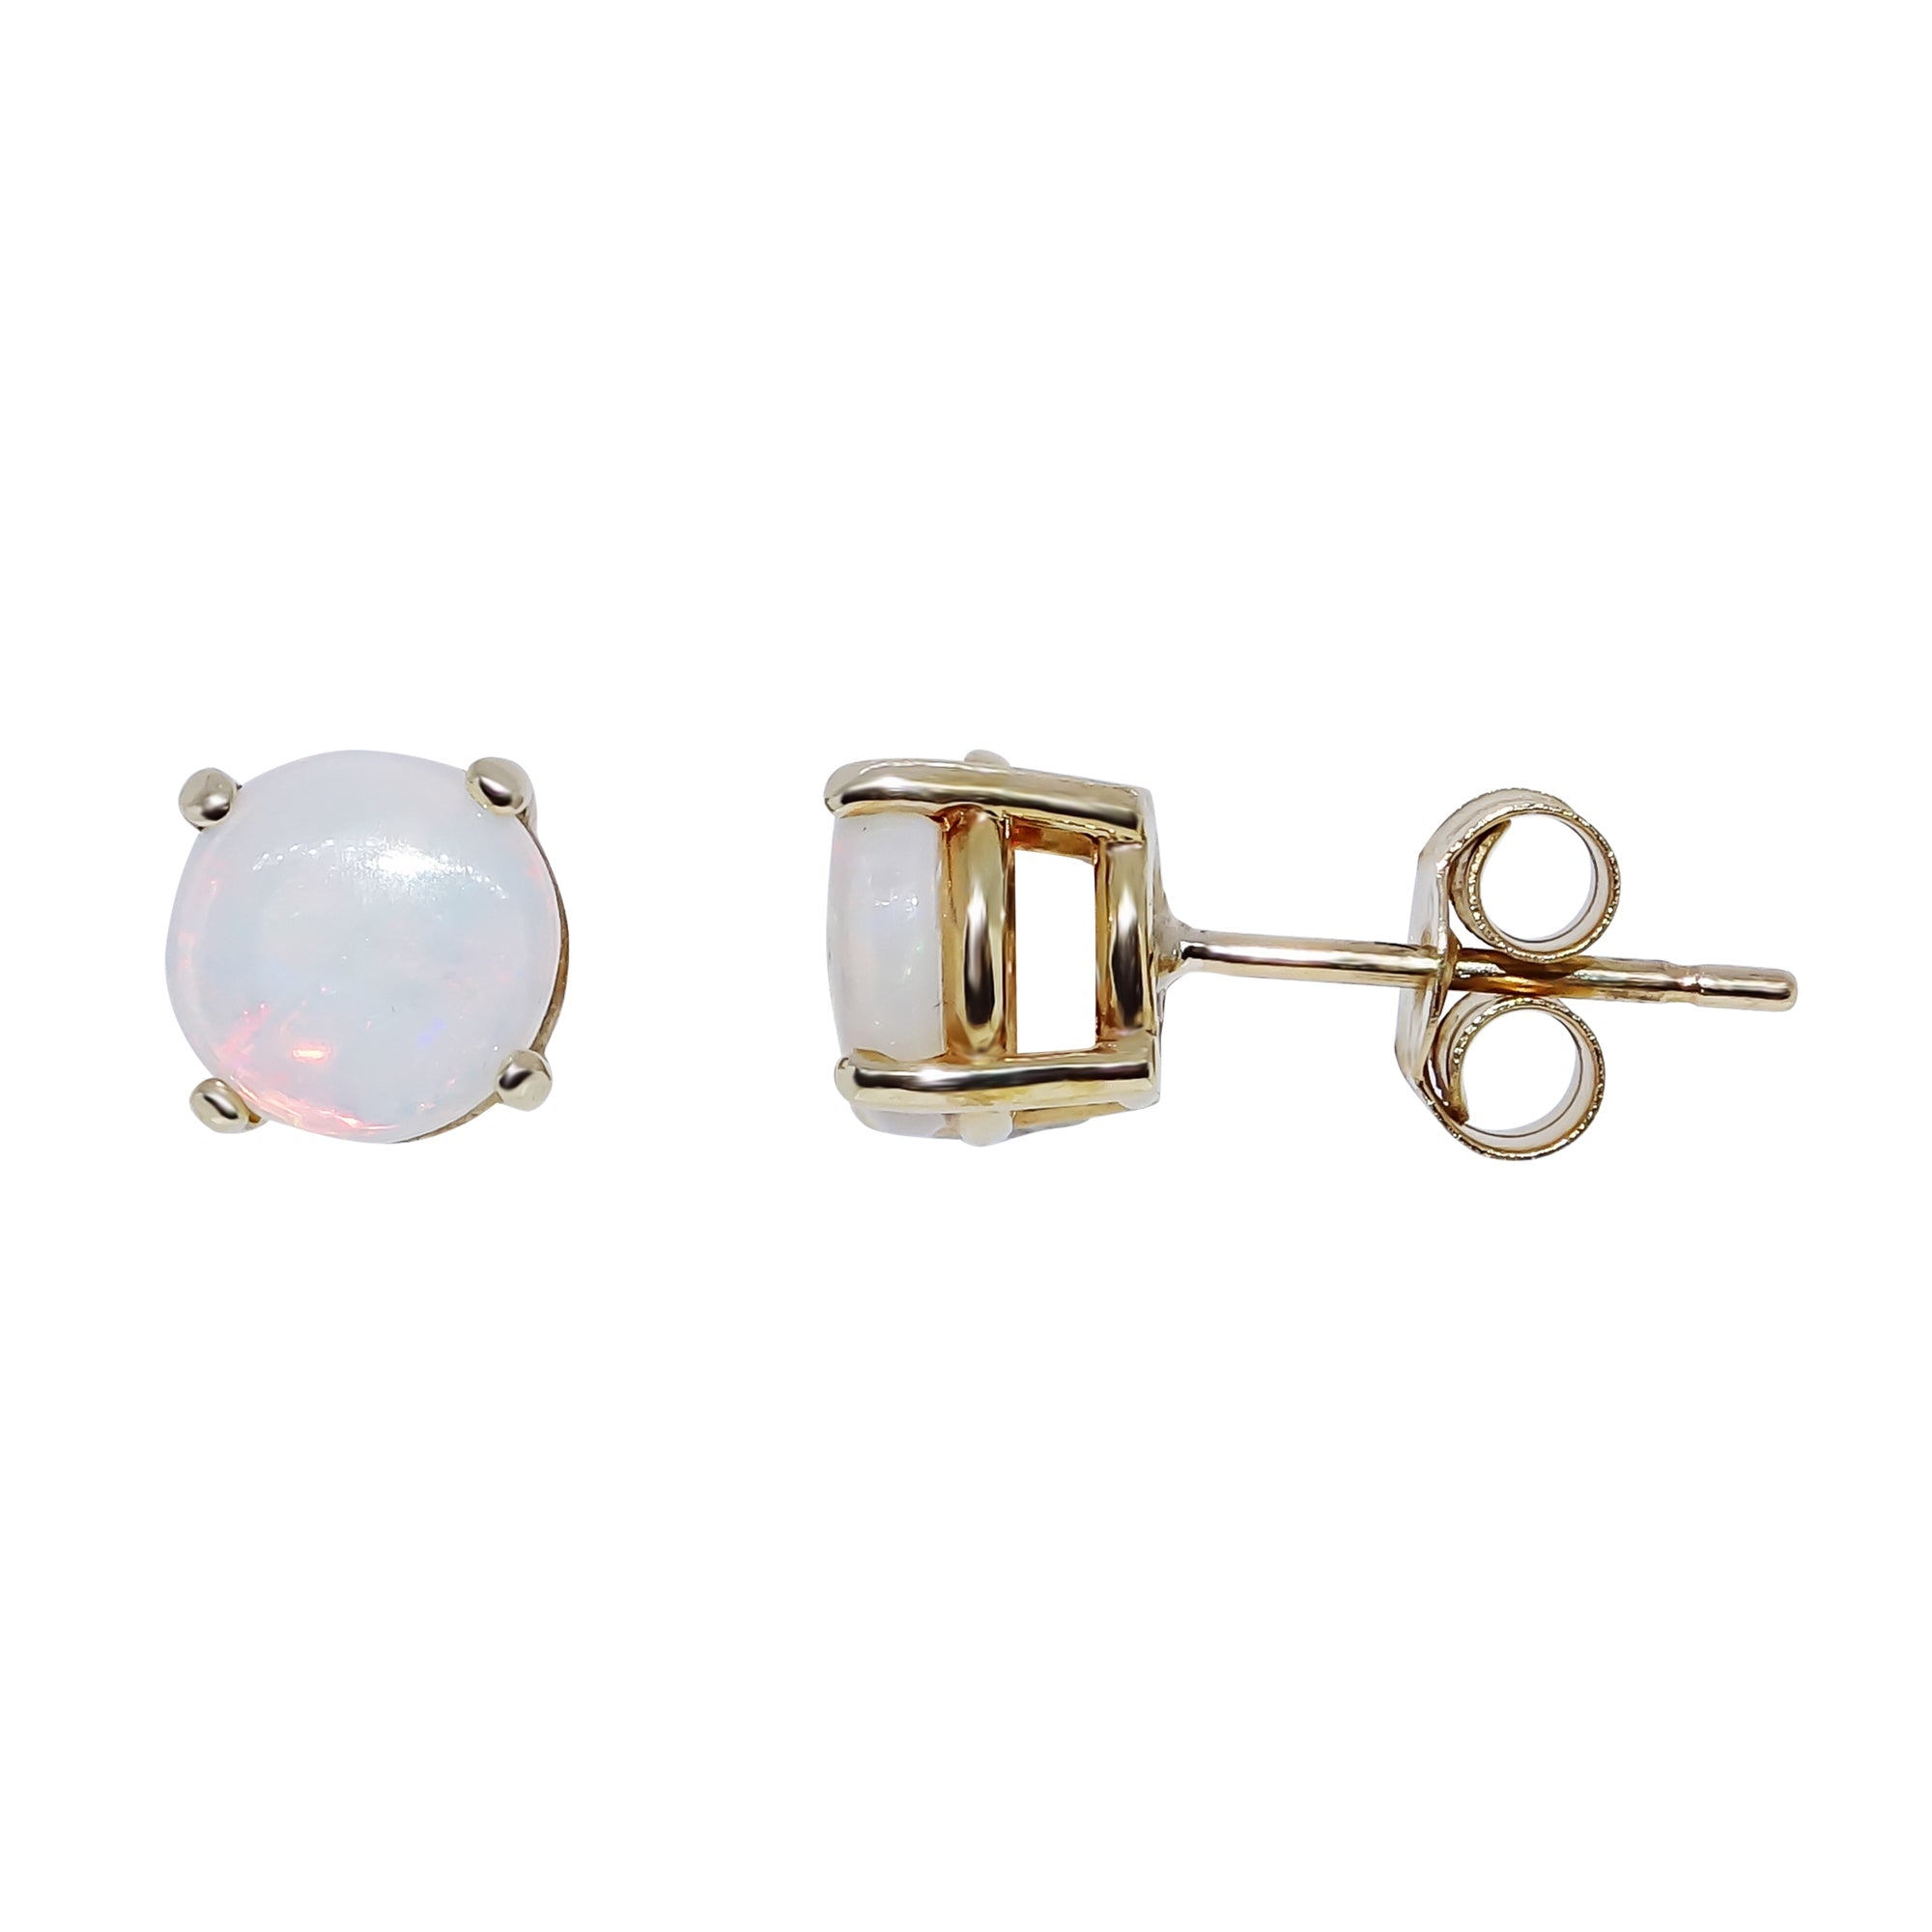 9ct gold 6mm round opal stud earrings